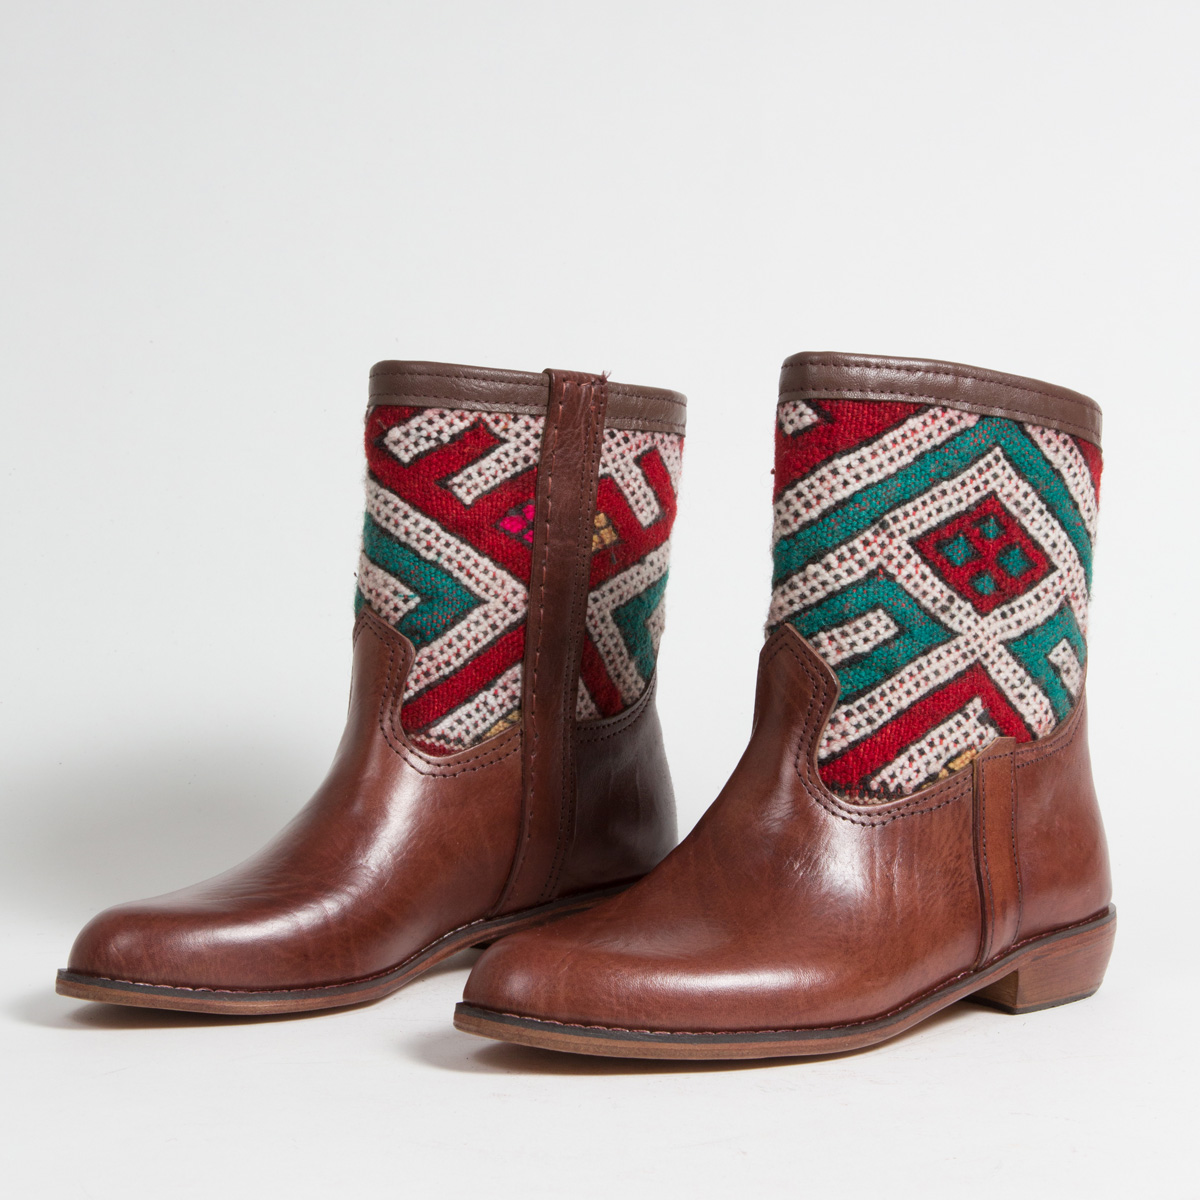 Bottines Kilim cuir mababouche artisanales (Réf. CB4-40)